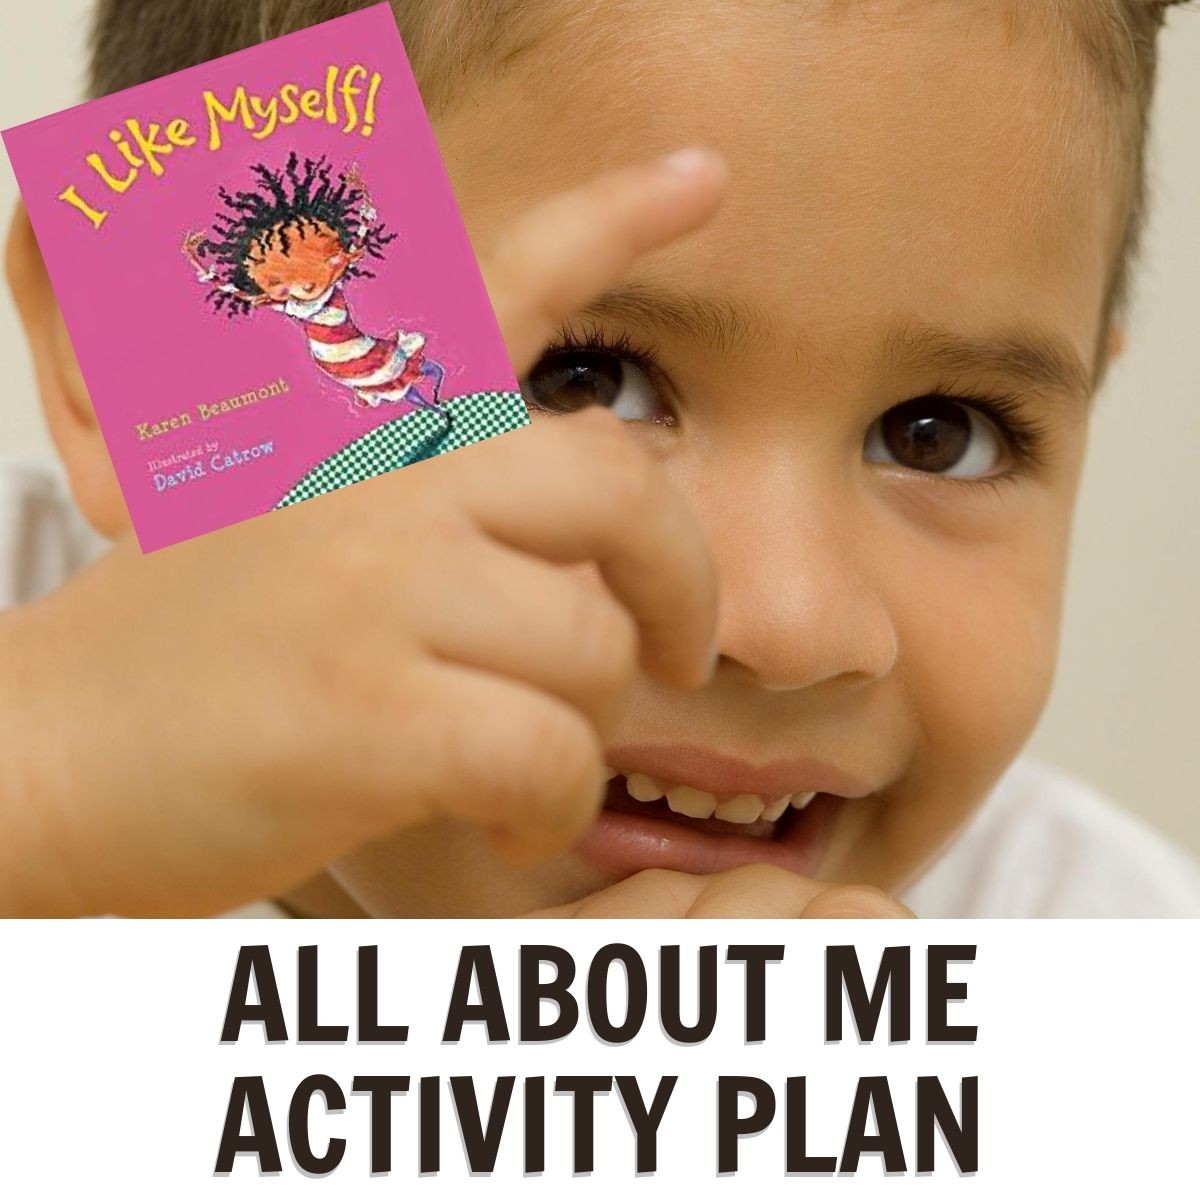 preschooler pointing to himself with cover over the book I like myself by Karen Beaumont text reads All About Me Activity Plan